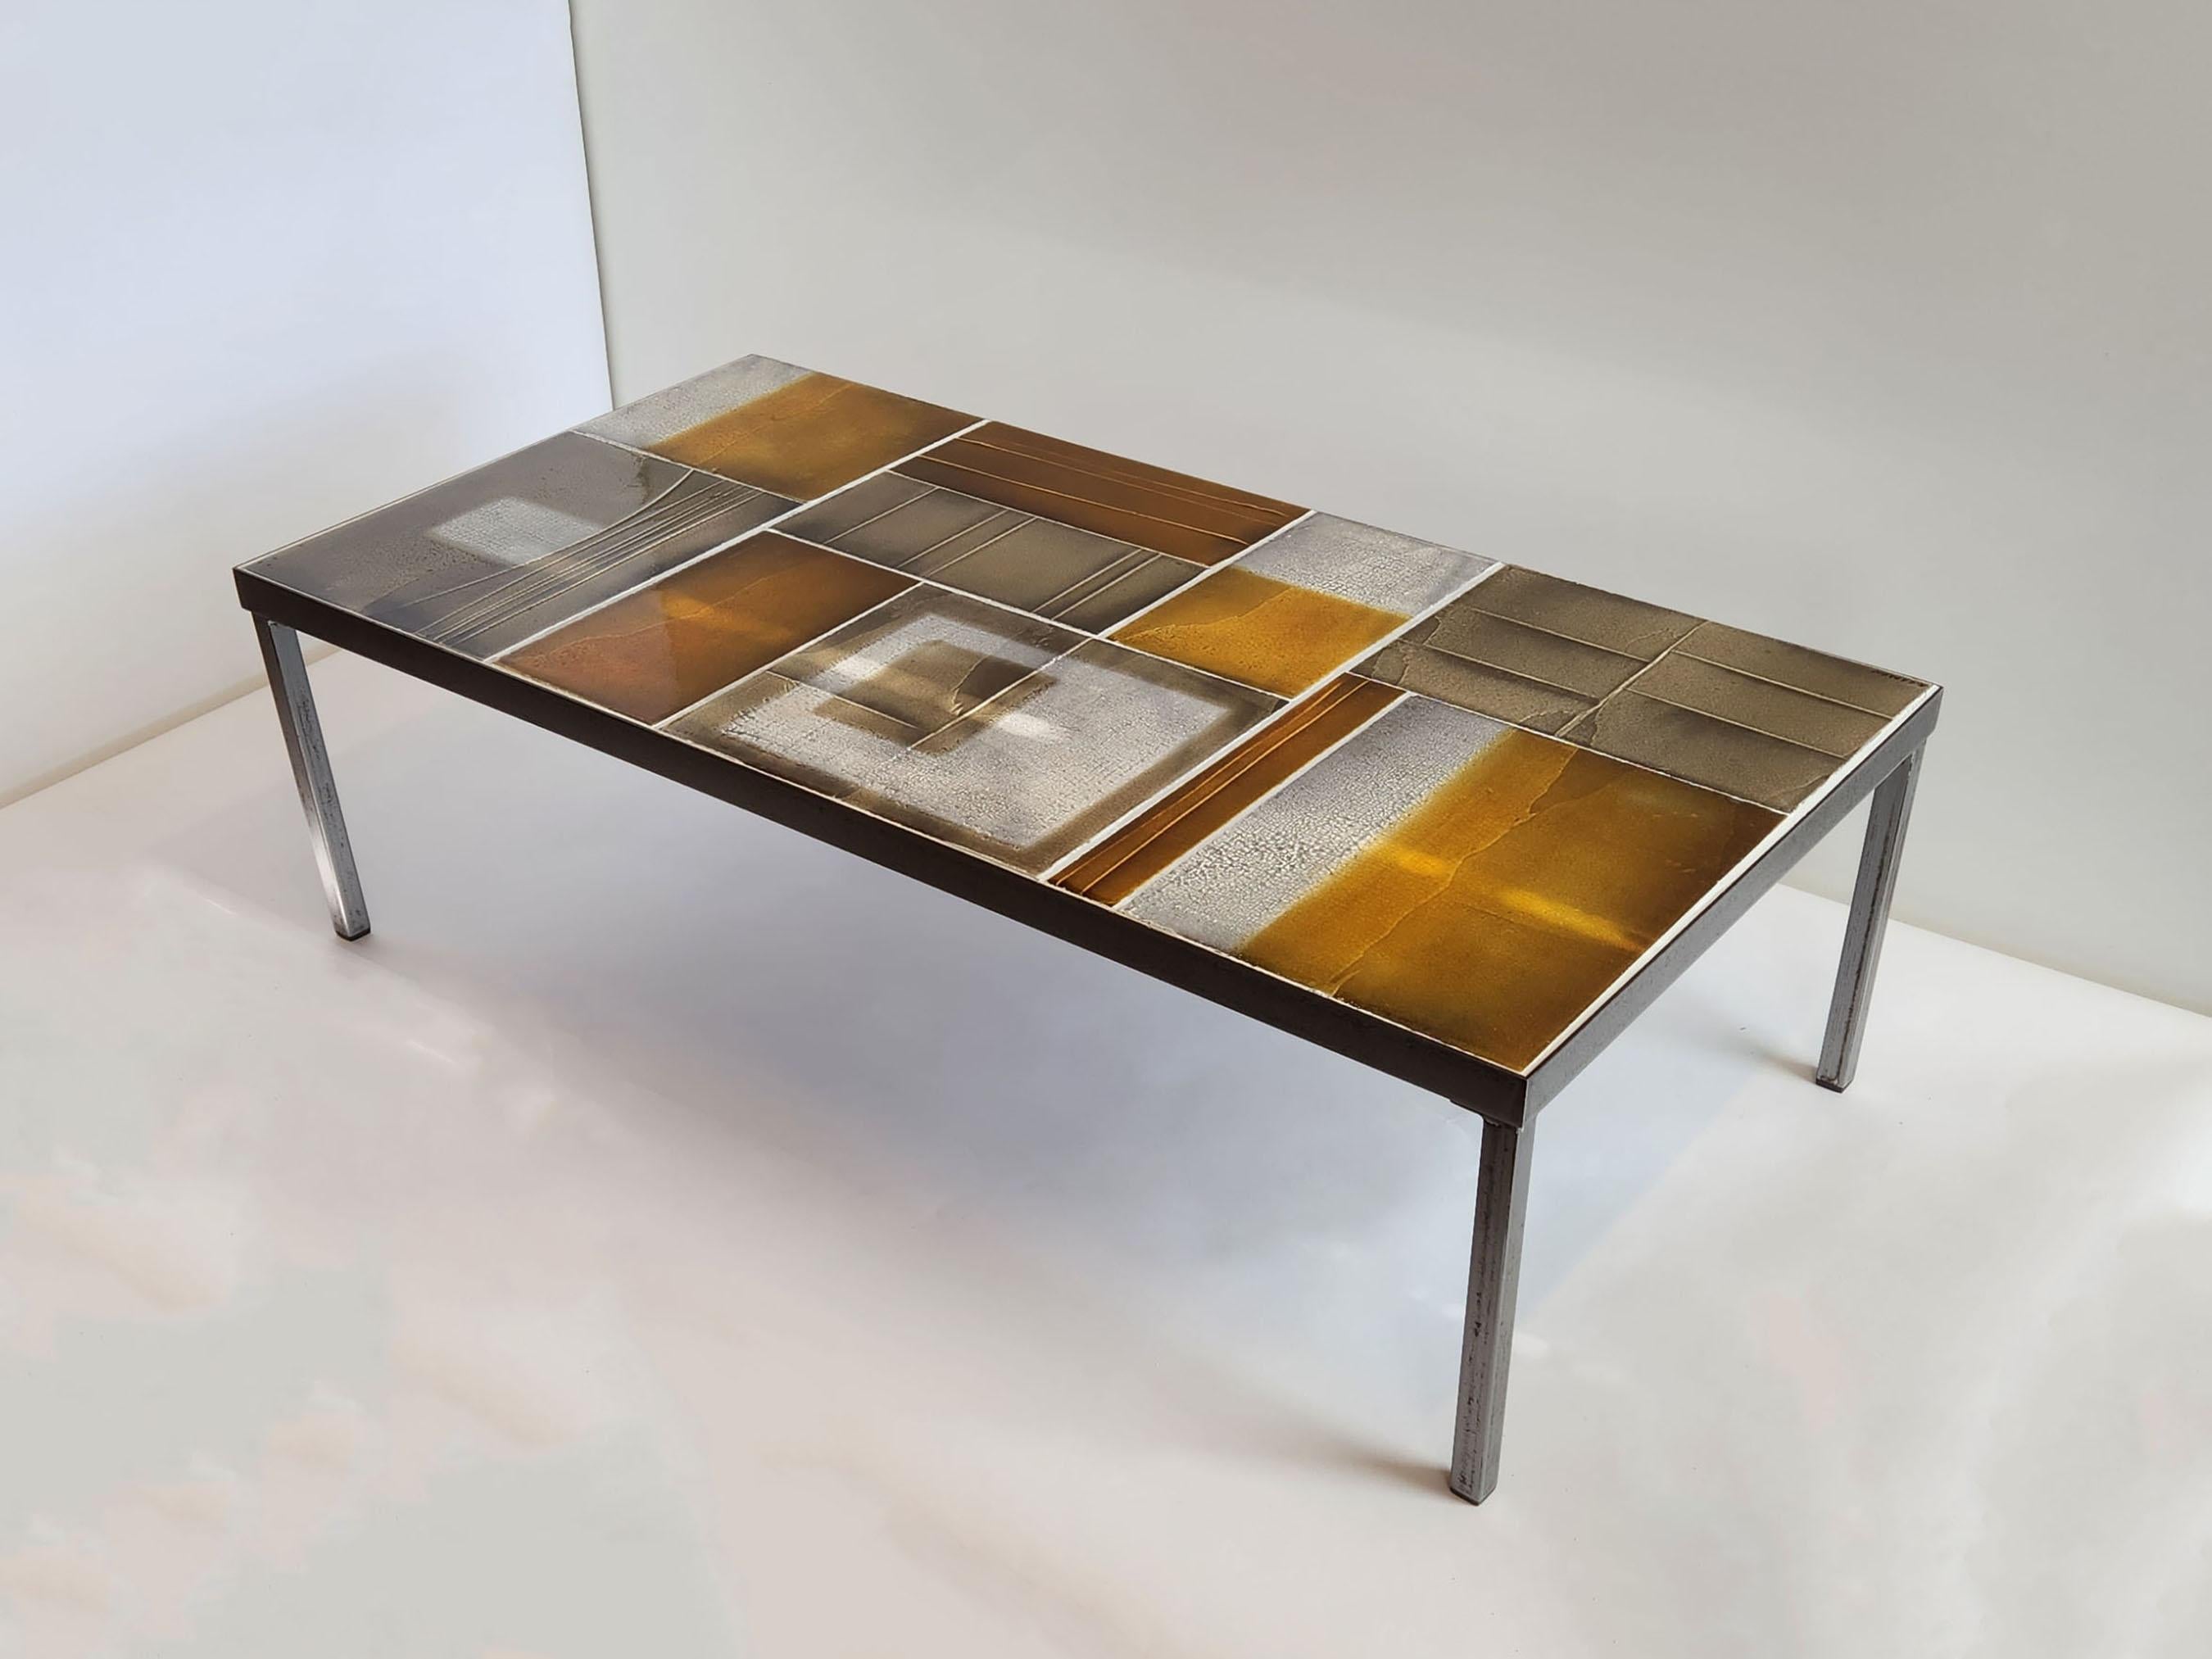 Roger Capron - 1970's Coffee Table with Lava Tiles Series on a Metal Frame  In Excellent Condition For Sale In Stratford, CT